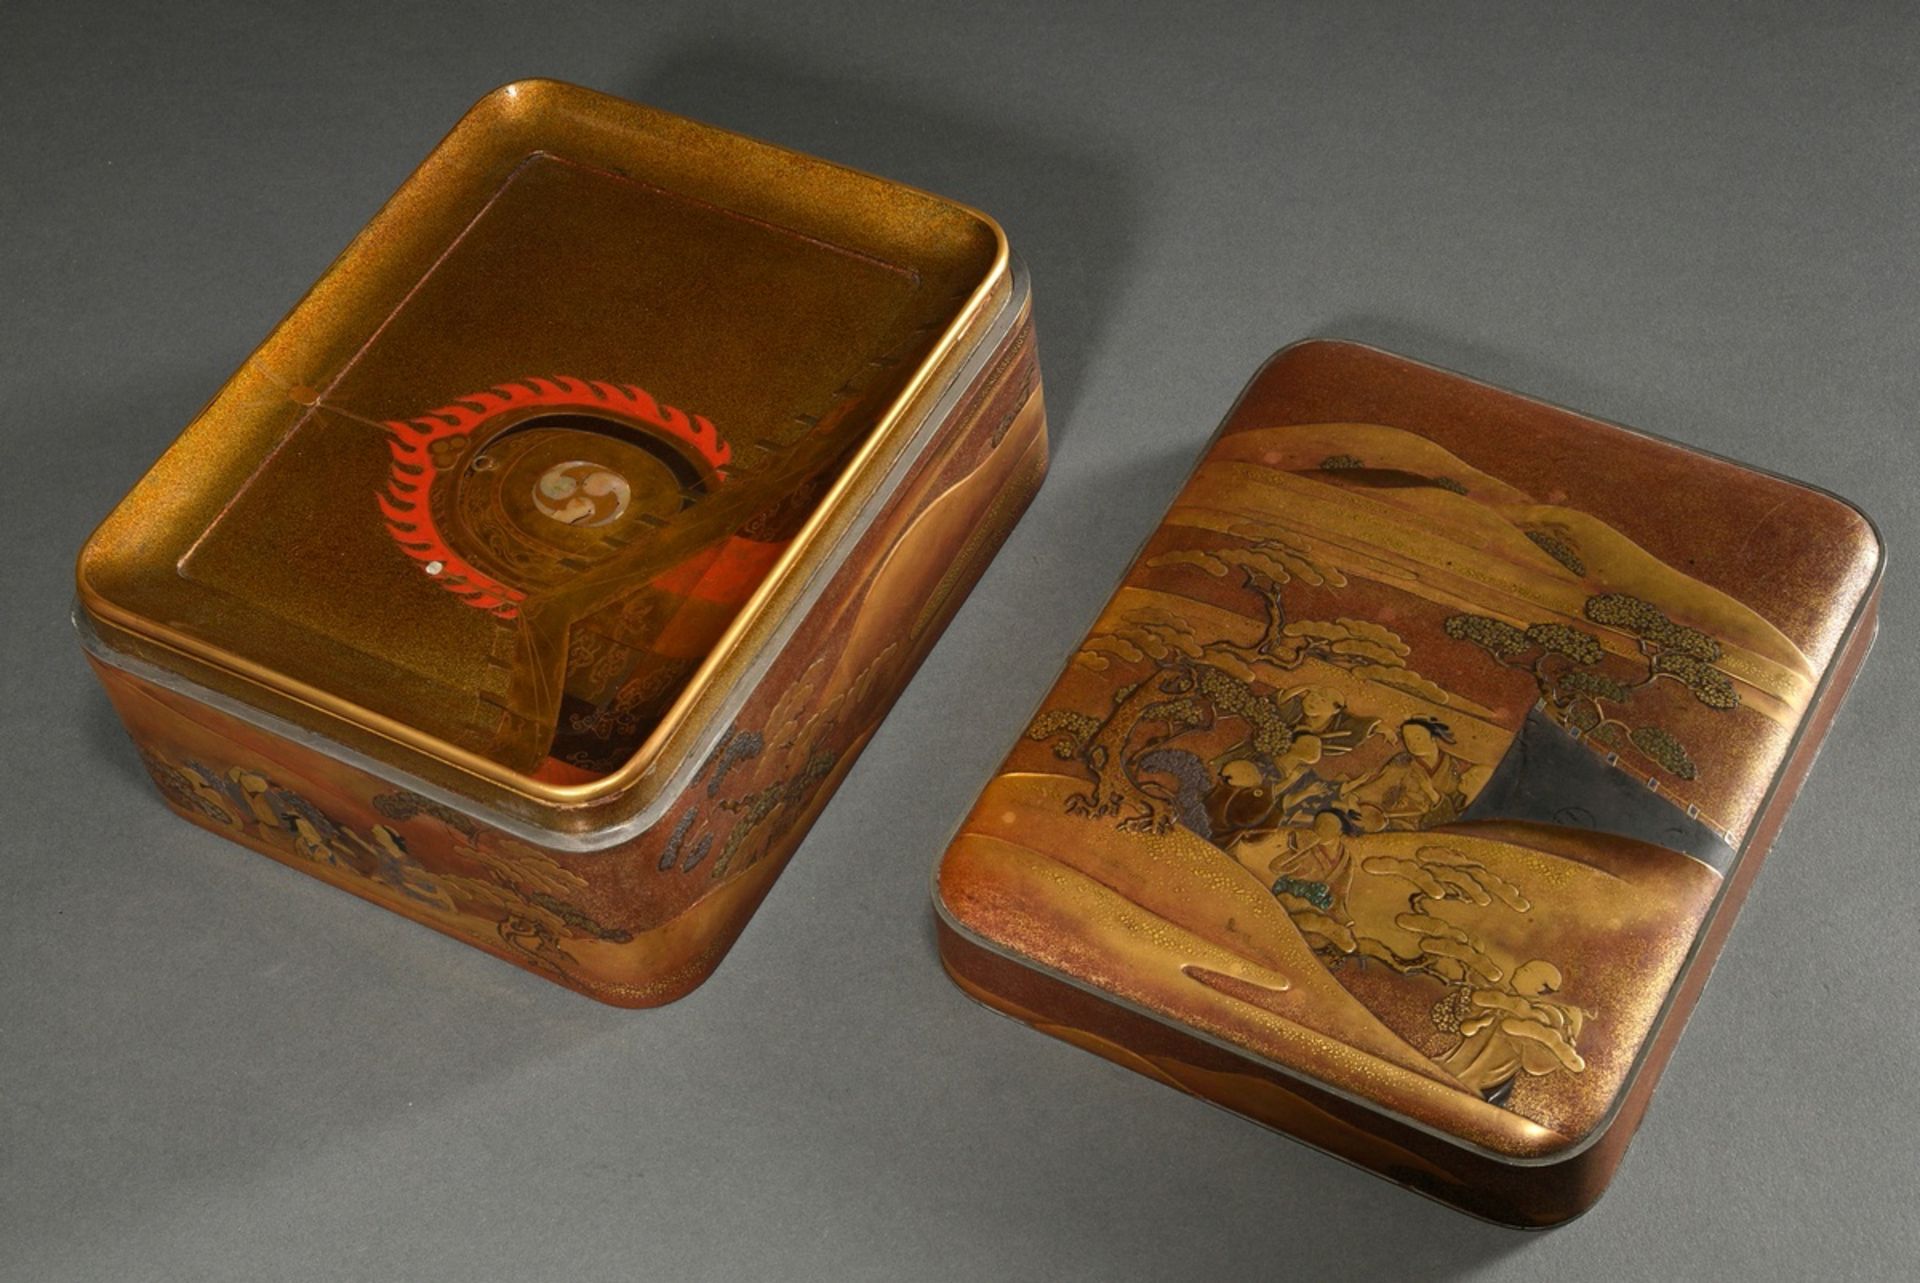 Magnificent Kobako lacquer lidded box for incense burners "Noble society in a mountainous landscape - Image 8 of 9